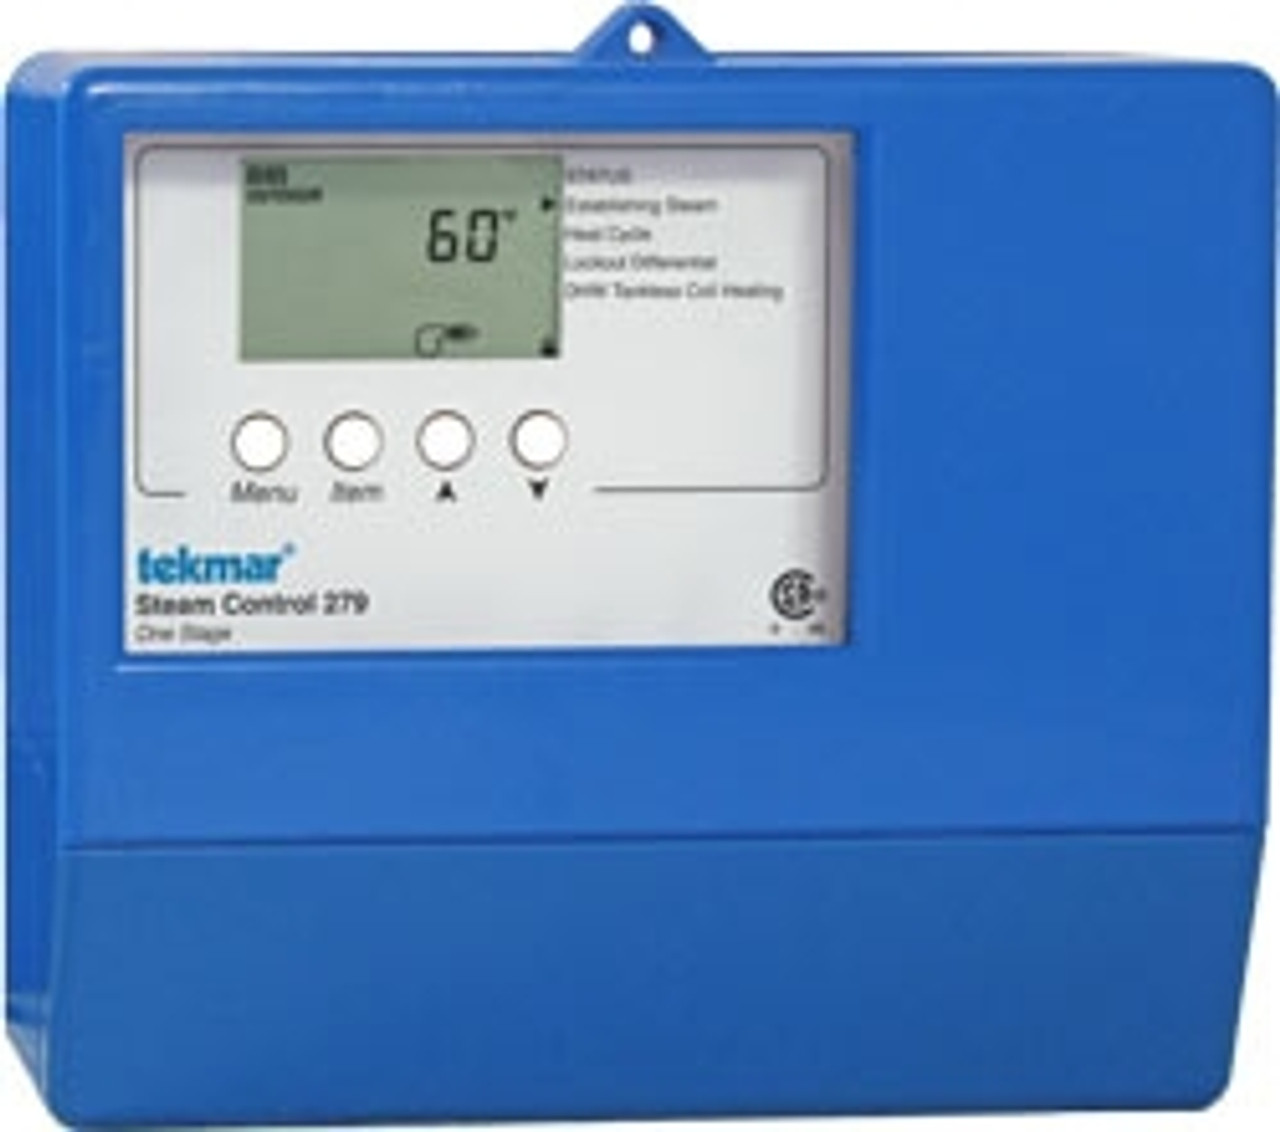 Tekmar 279 Steam Control One Stage